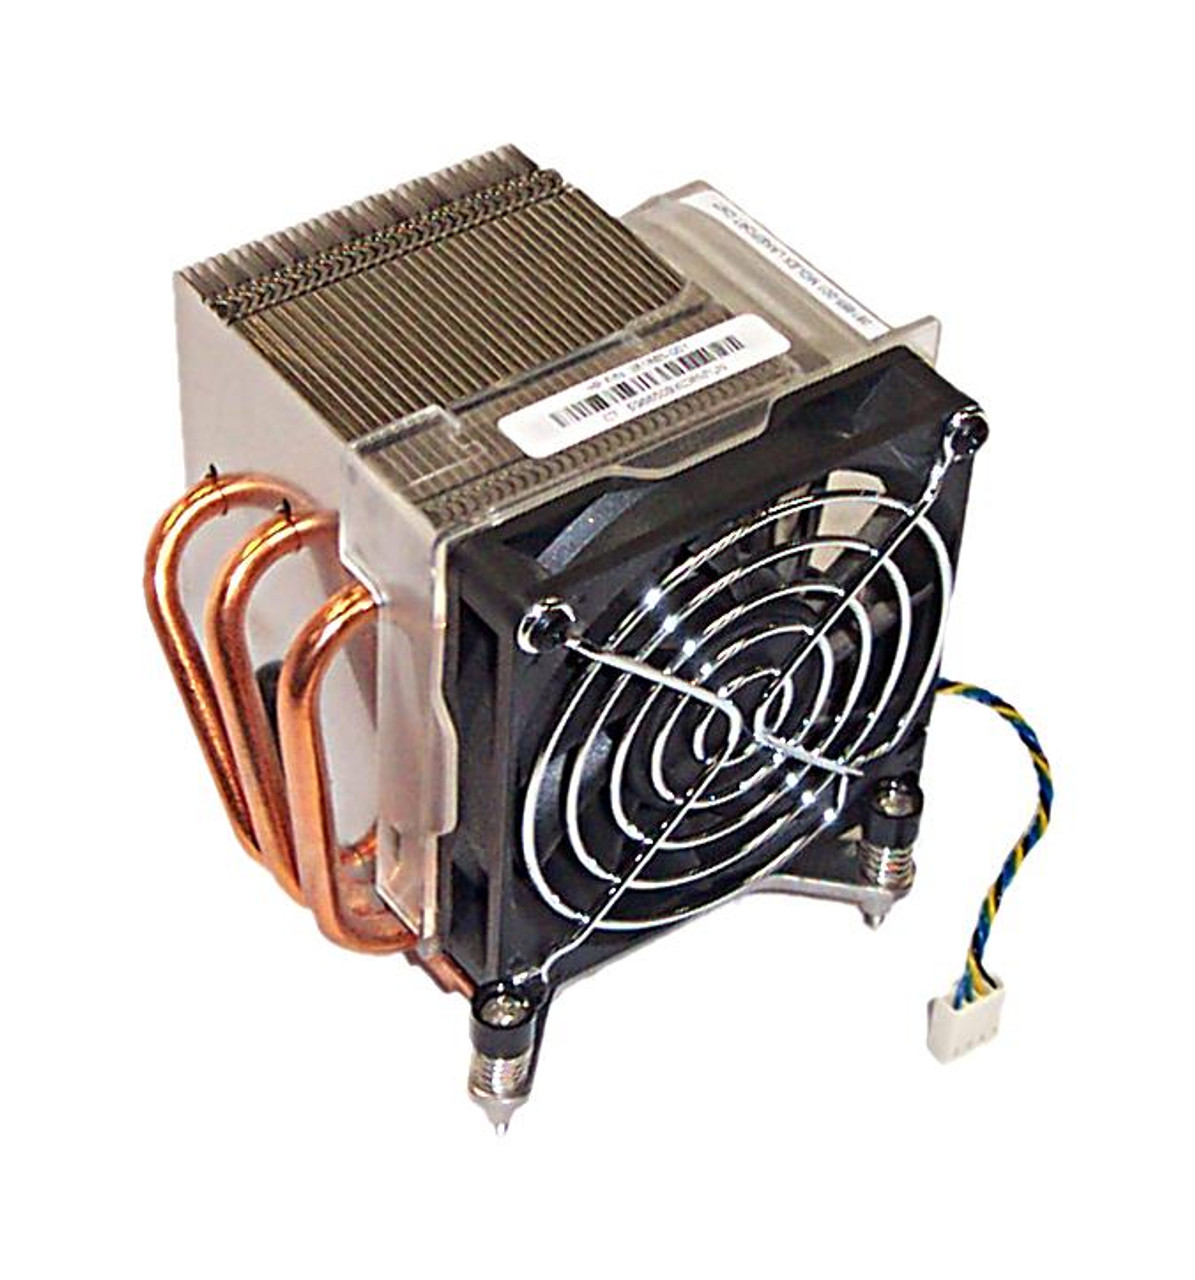 381865-001-03 HP CPU Heat Sink & Fan Assembly for DC7600 P4